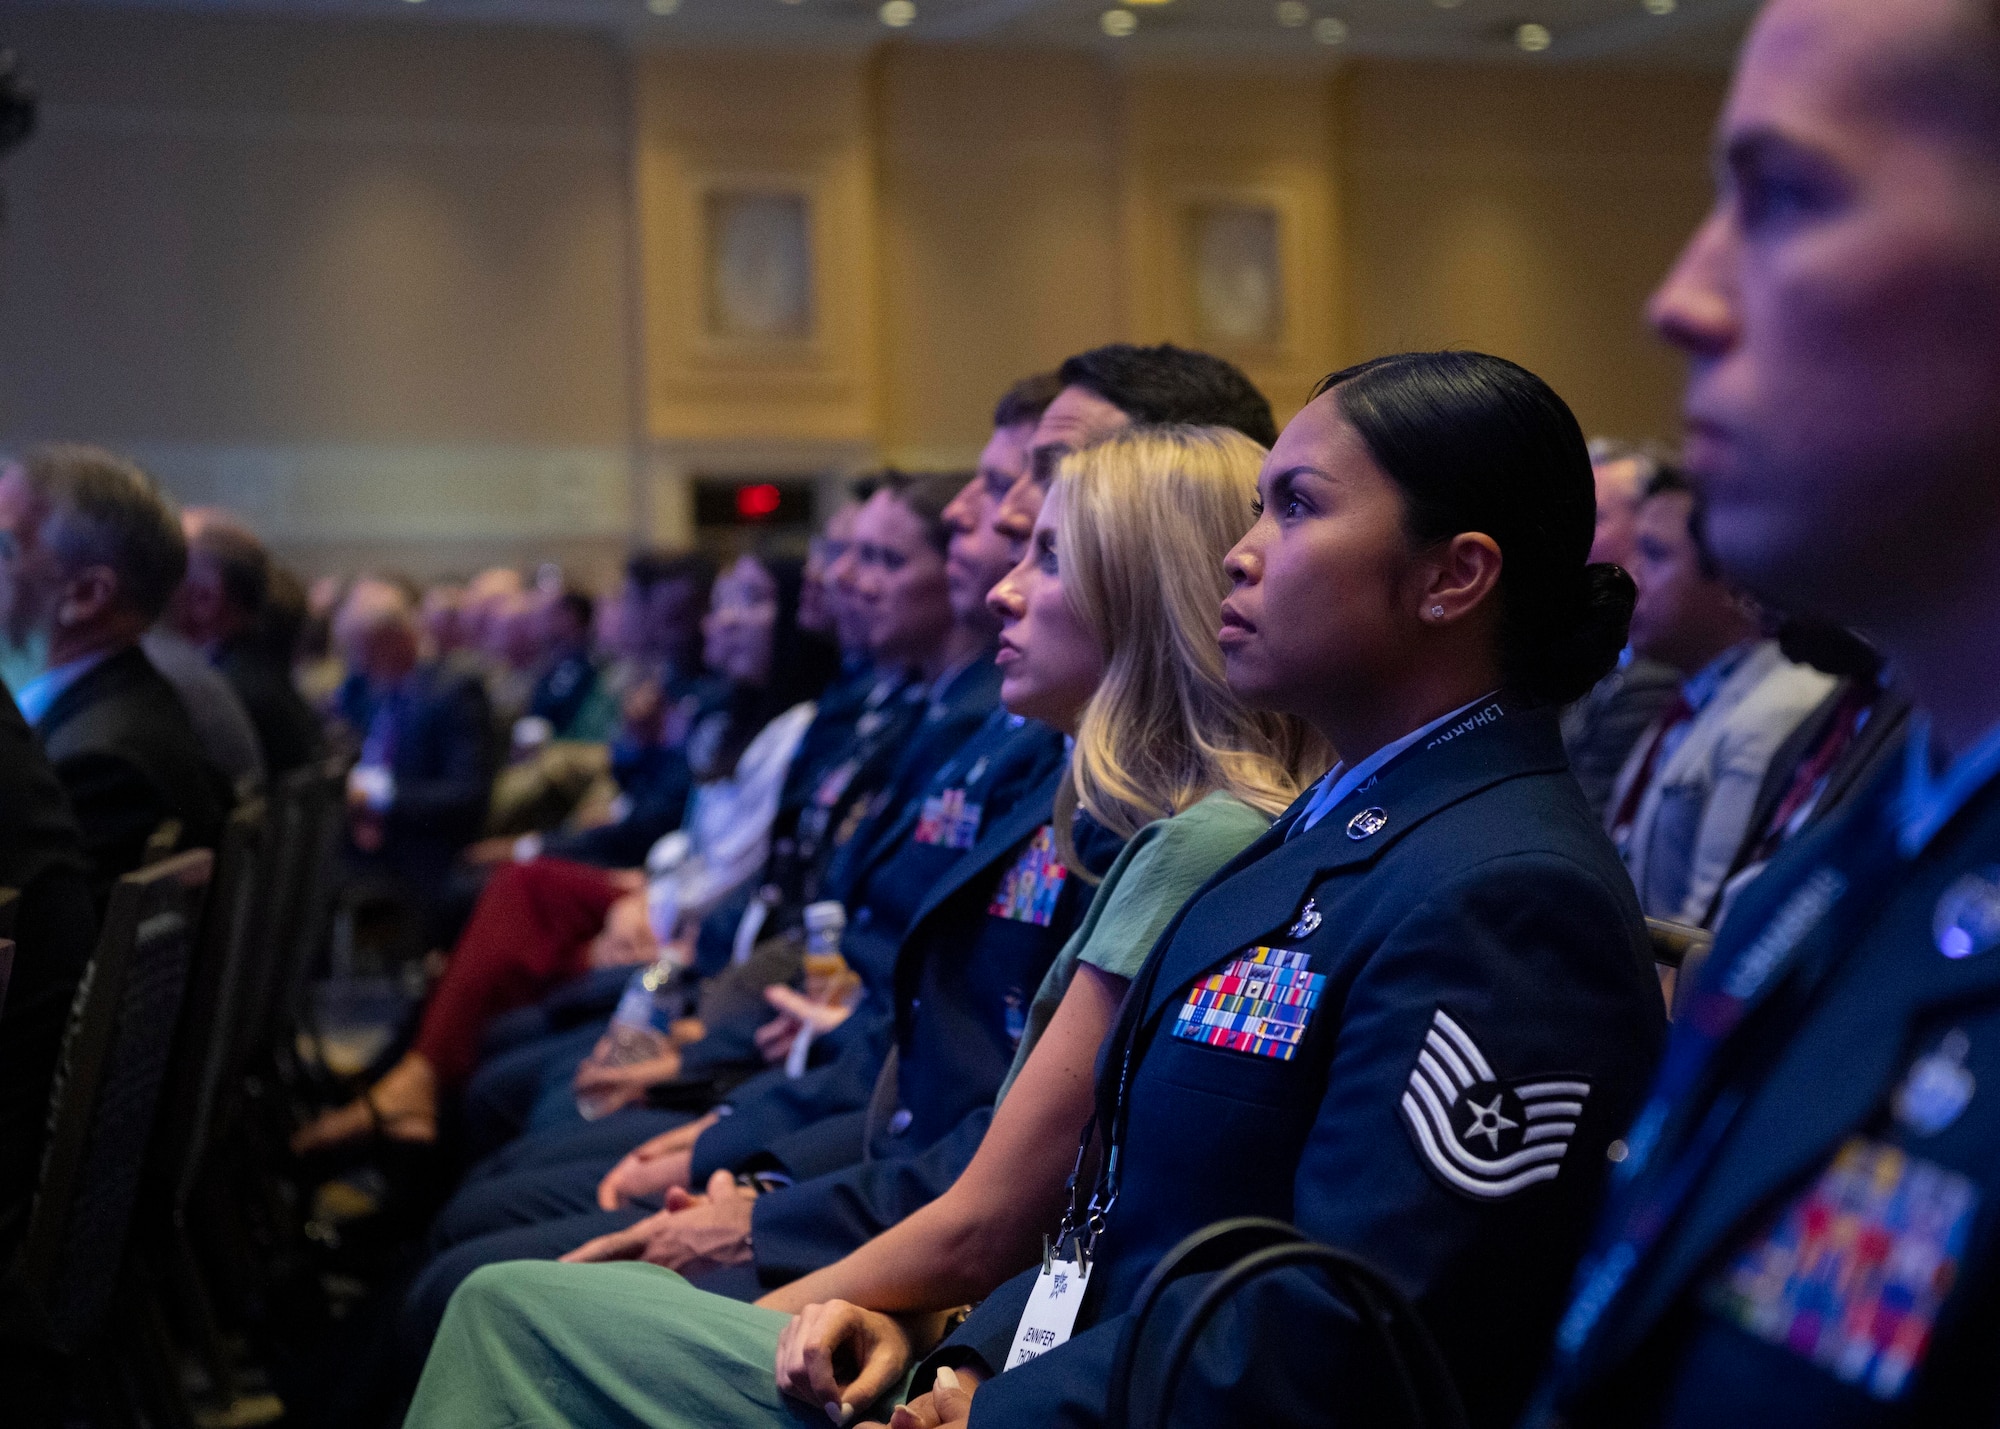 Tech. Sgt. Jennifer G. Thomas, 2022 Outstanding Airman of the Year representing Air Force Material Command, listens to Secretary of the Air Force Frank Kendall’s keynote address at the Air and Space Forces Association’s Air, Space and Cyber Conference in National Harbor, Md., Sept. 19, 2022. Thomas was recognized as one of the 12 Outstanding Airmen of the Year based upon superior leadership, job performance and personal achievement. (U.S. Air Force photo by Staff Sgt. Nick Z. Erwin)